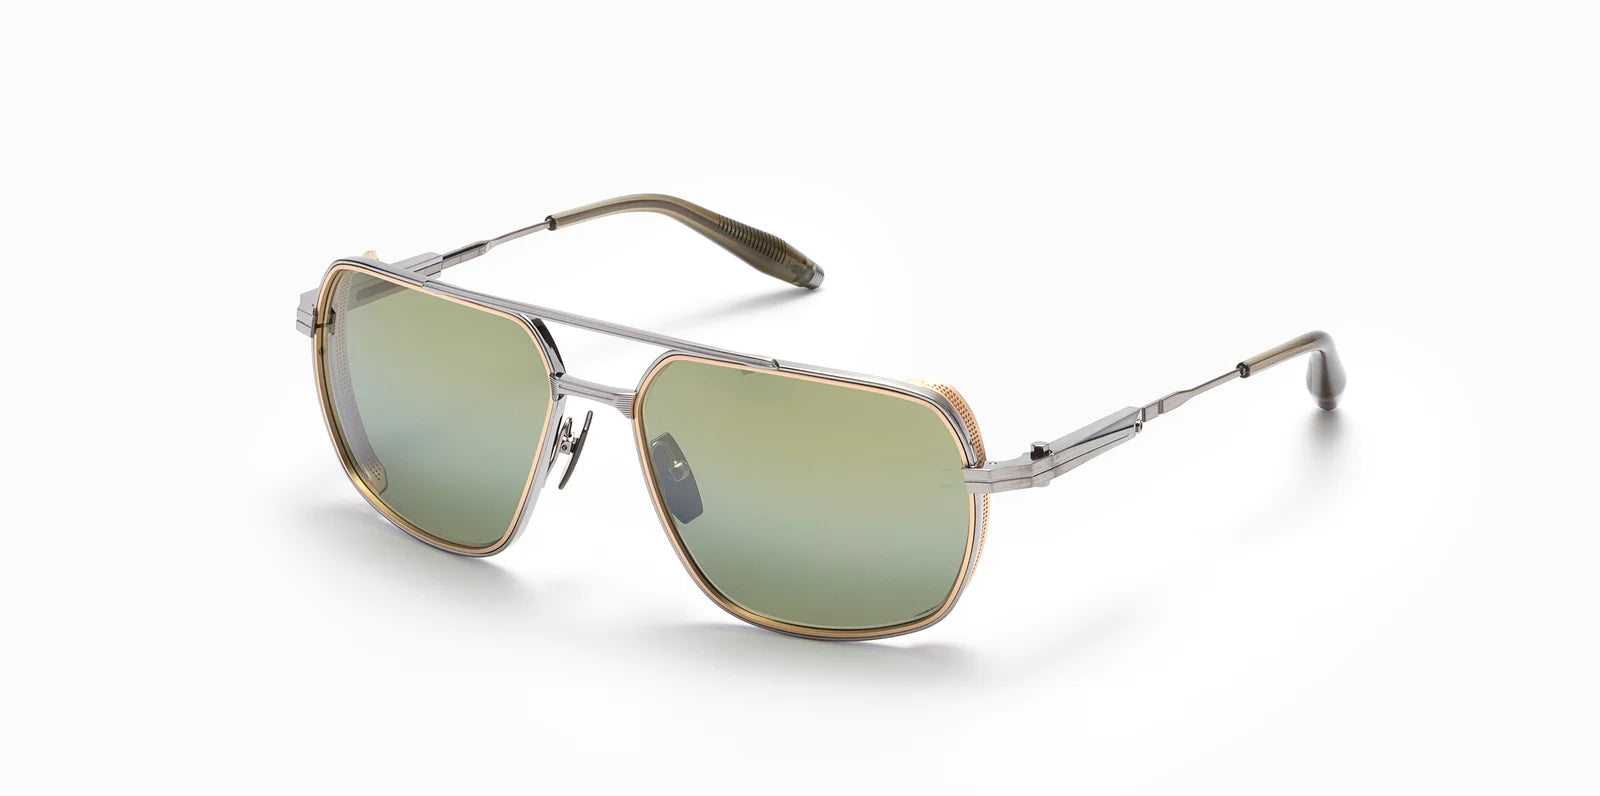 Three-quarter view of Akoni's Pathfinder frame, a curved navigator shape featuring mini side-shields with perforations reminiscent of the finest vintage sports car interiors and an adjustable temple system.